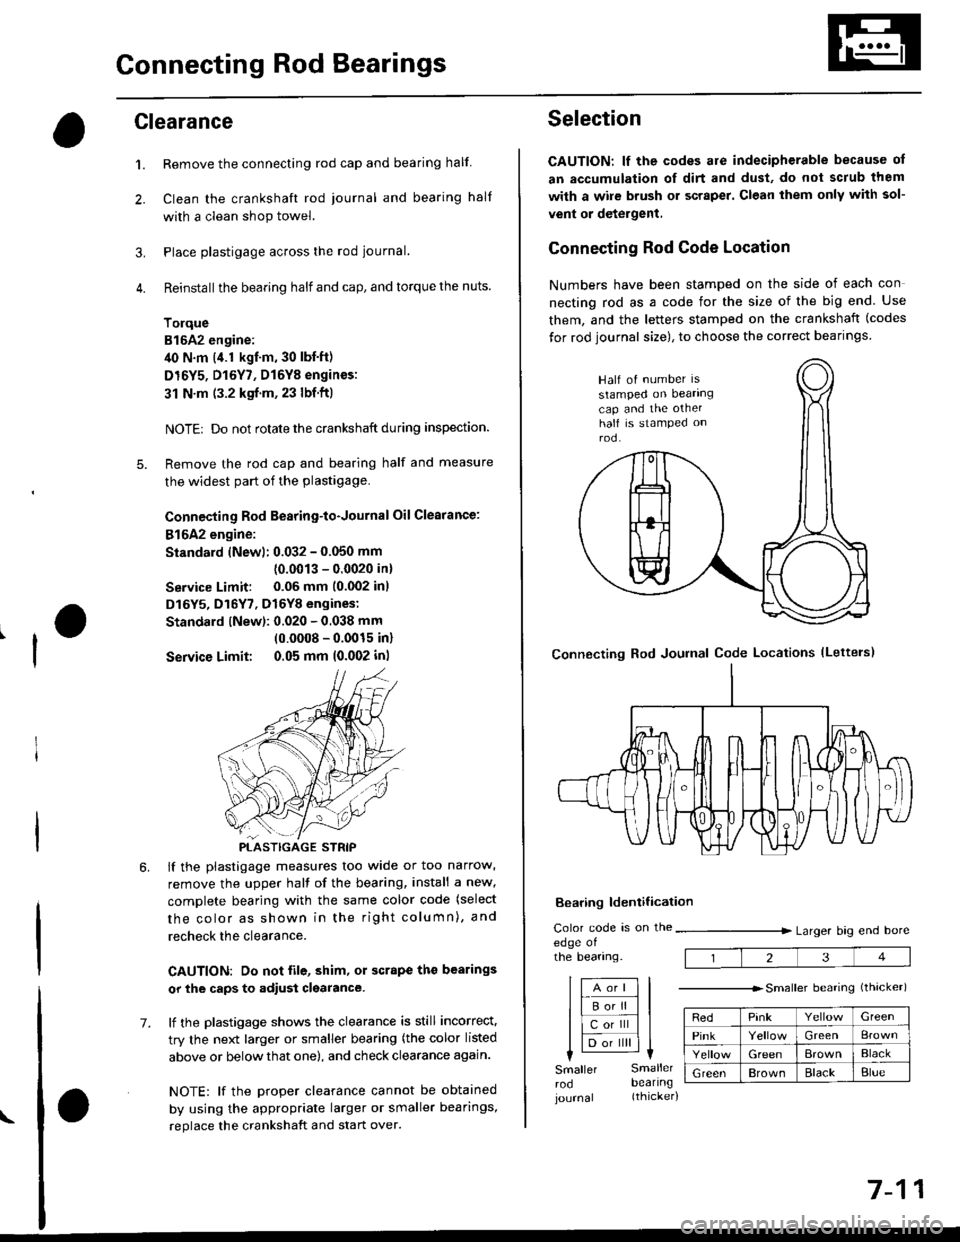 HONDA CIVIC 1998 6.G Workshop Manual Connecting Rod Bearings
Clearance
Remove the connecting rod cap and bearing half
Clean the crankshaft rod iournal and bearing half
with a clean shop towel.
Place plastigage across the rod journal.
Rei